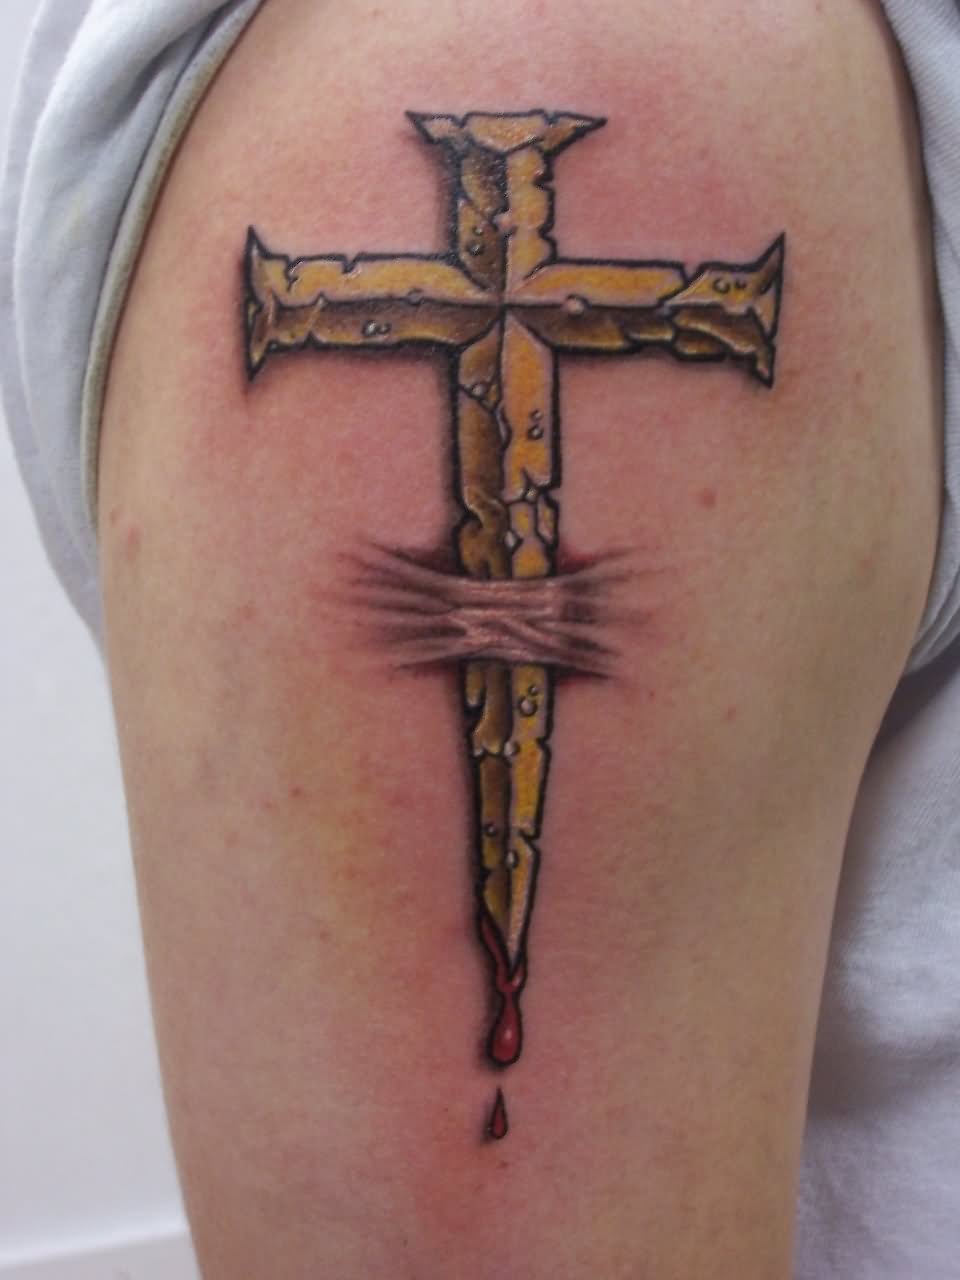 Cool 3D Ripped Skin Cross Tattoo Design For Shoulder